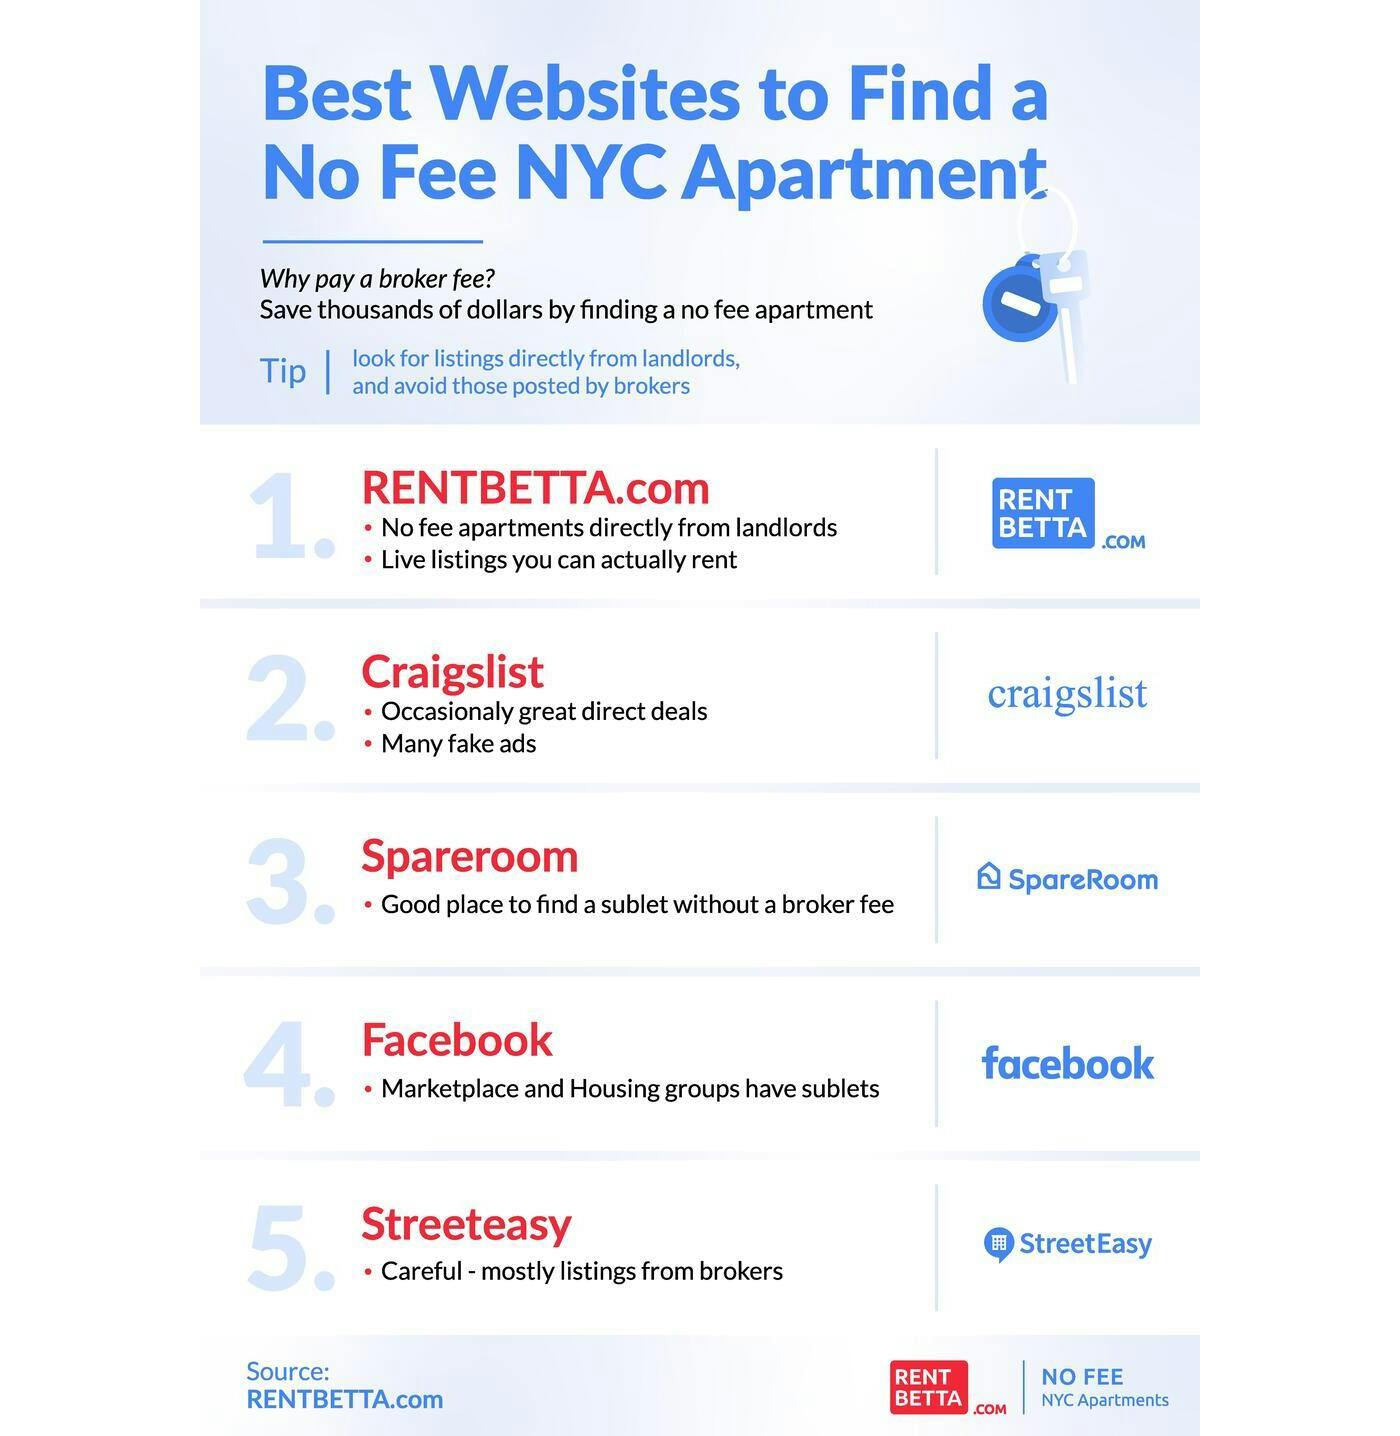 Infographic showing the top 5 websites in New York City to rent a no fee apartment